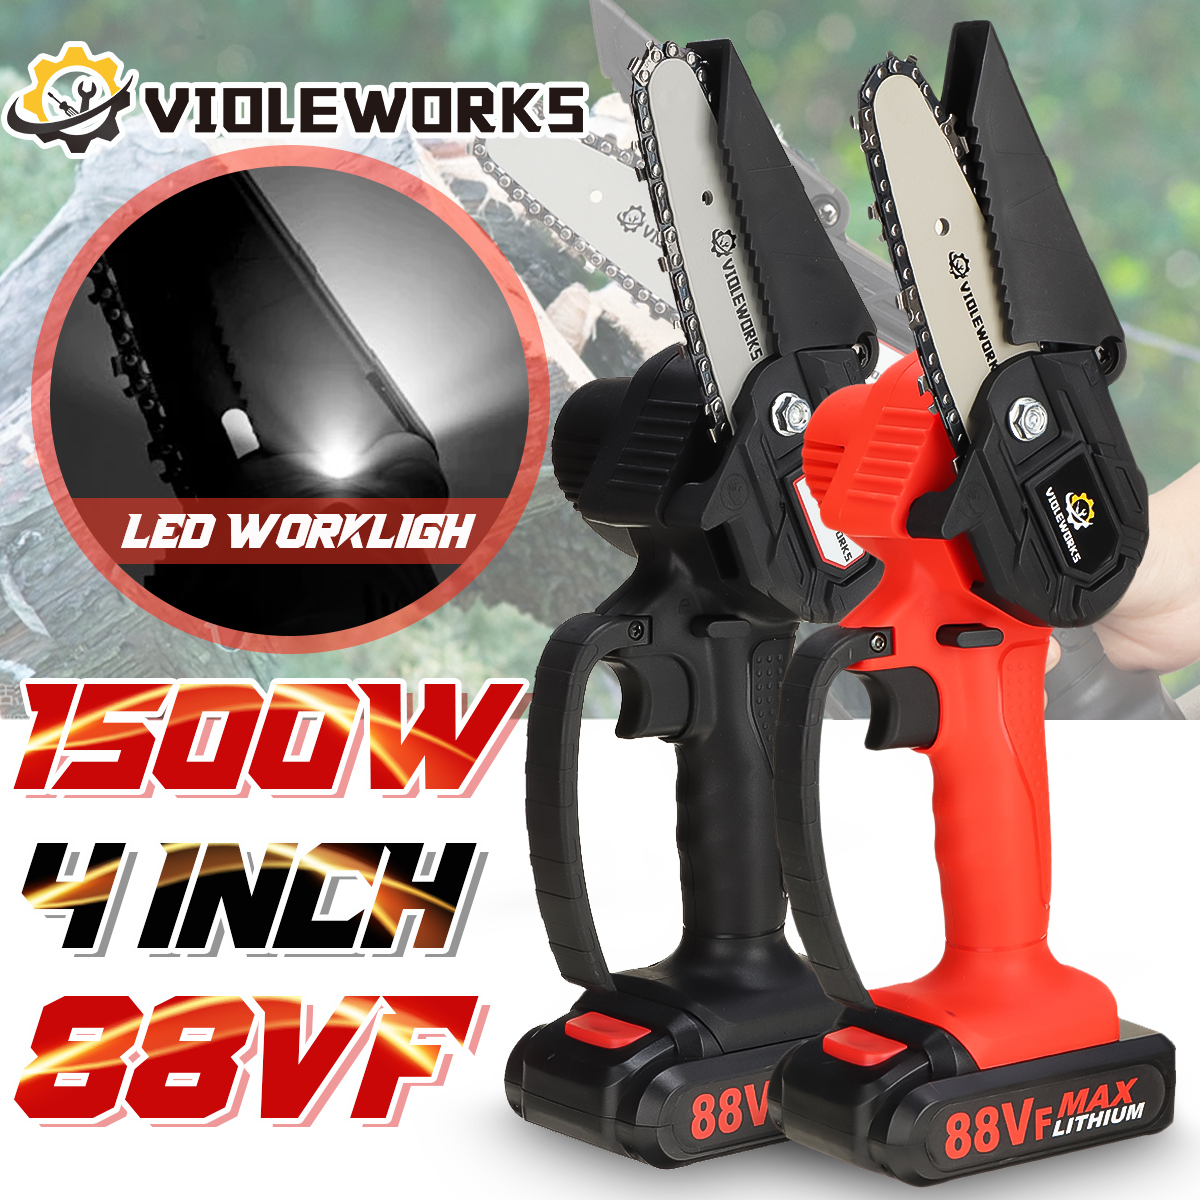 VIOLEWORKS-4-Inch-88VF-Cordless-Electric-Chain-Saw-1500W-One-Hand-Saw-LED-Woodworking-Wood-Cutter-W--1868924-6